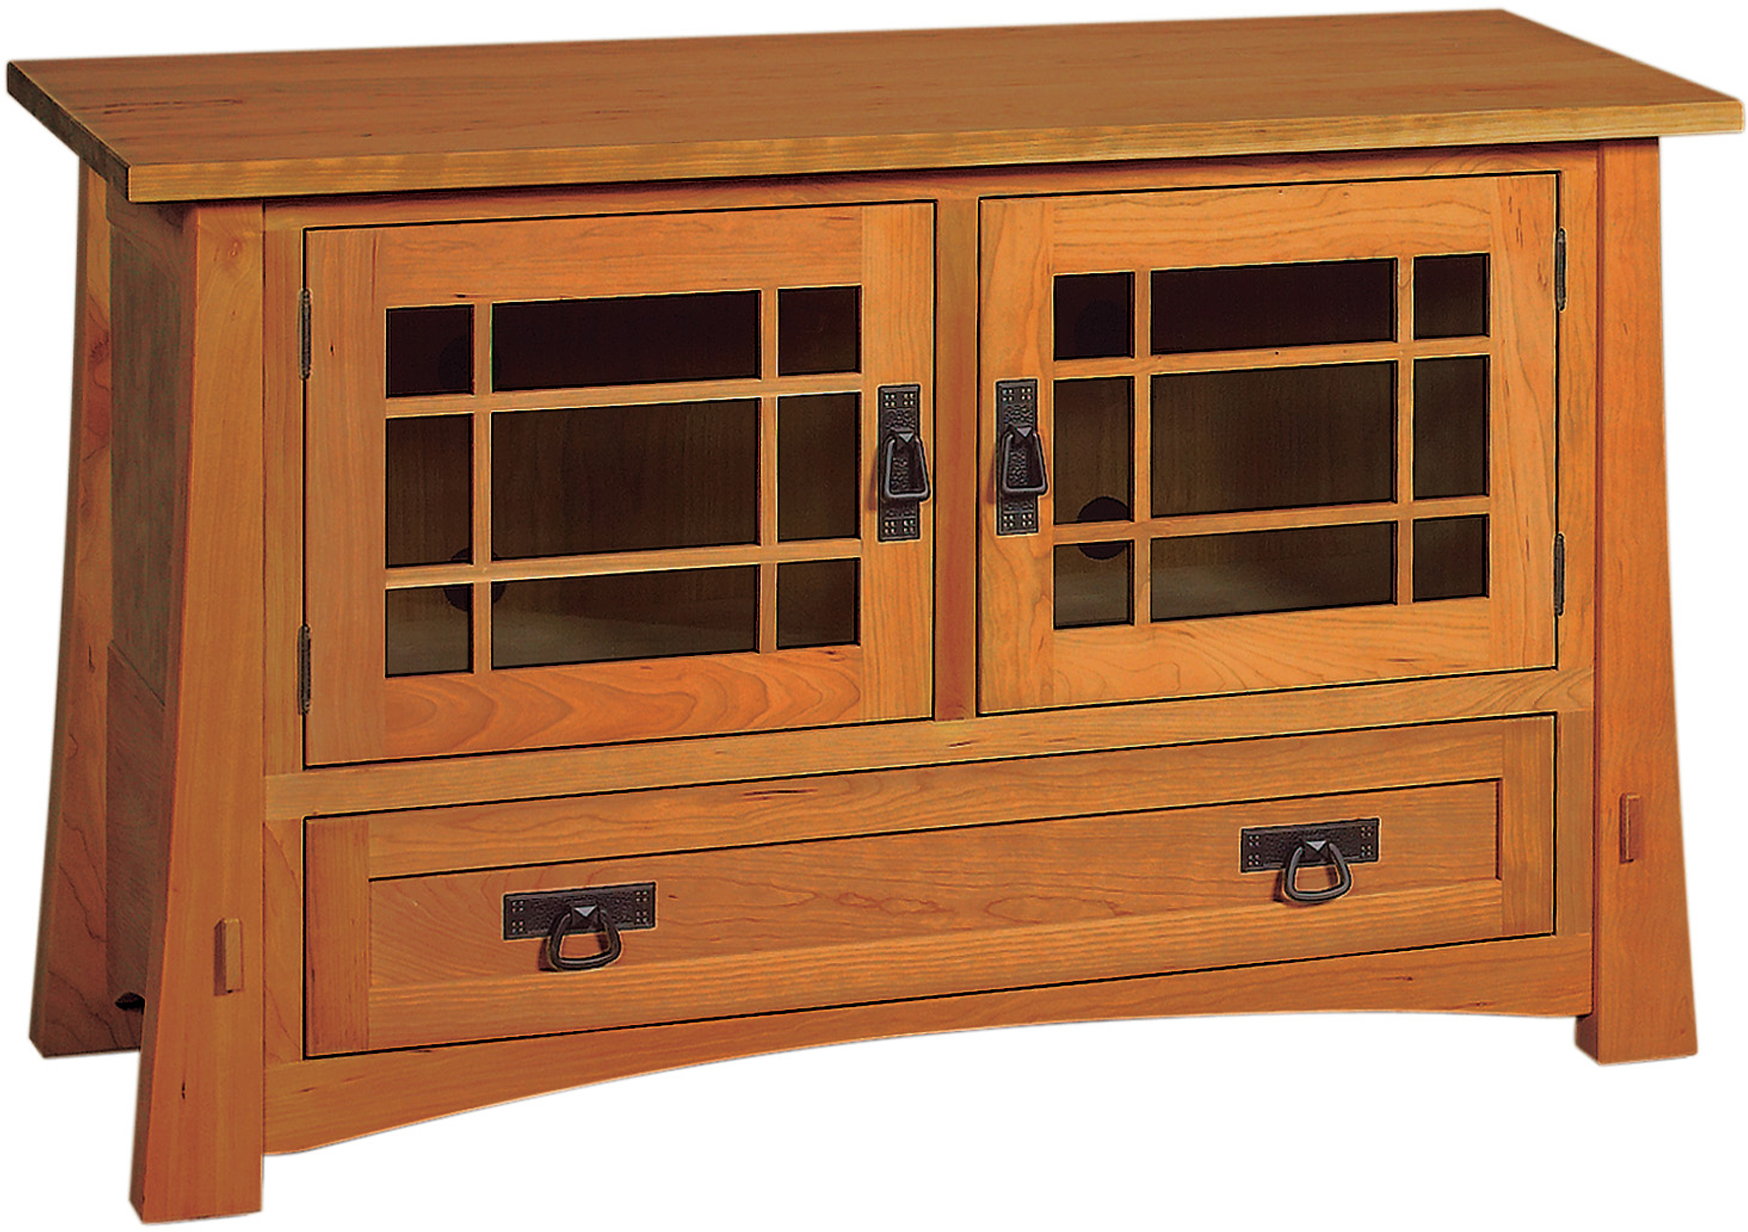 Modesto TV Cabinet with Drawers | Amish Modesto TV Cabinet